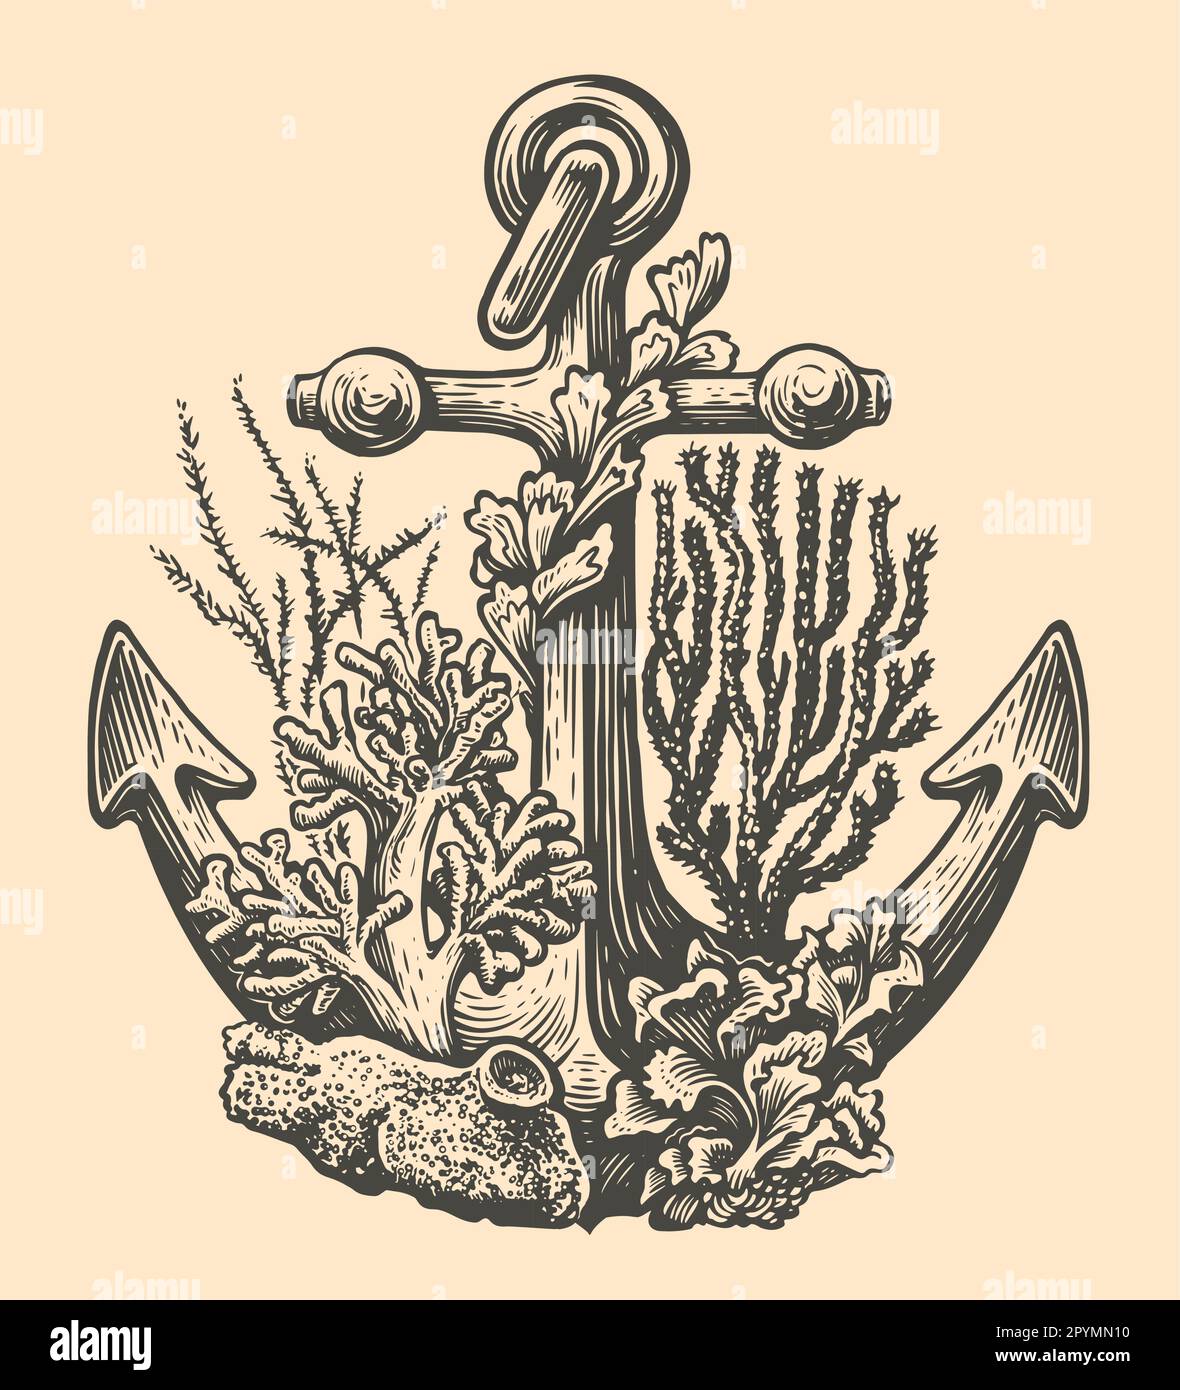 Vintage sea anchor in old engraving style. Marine concept. Sketch vector illustration Stock Vector